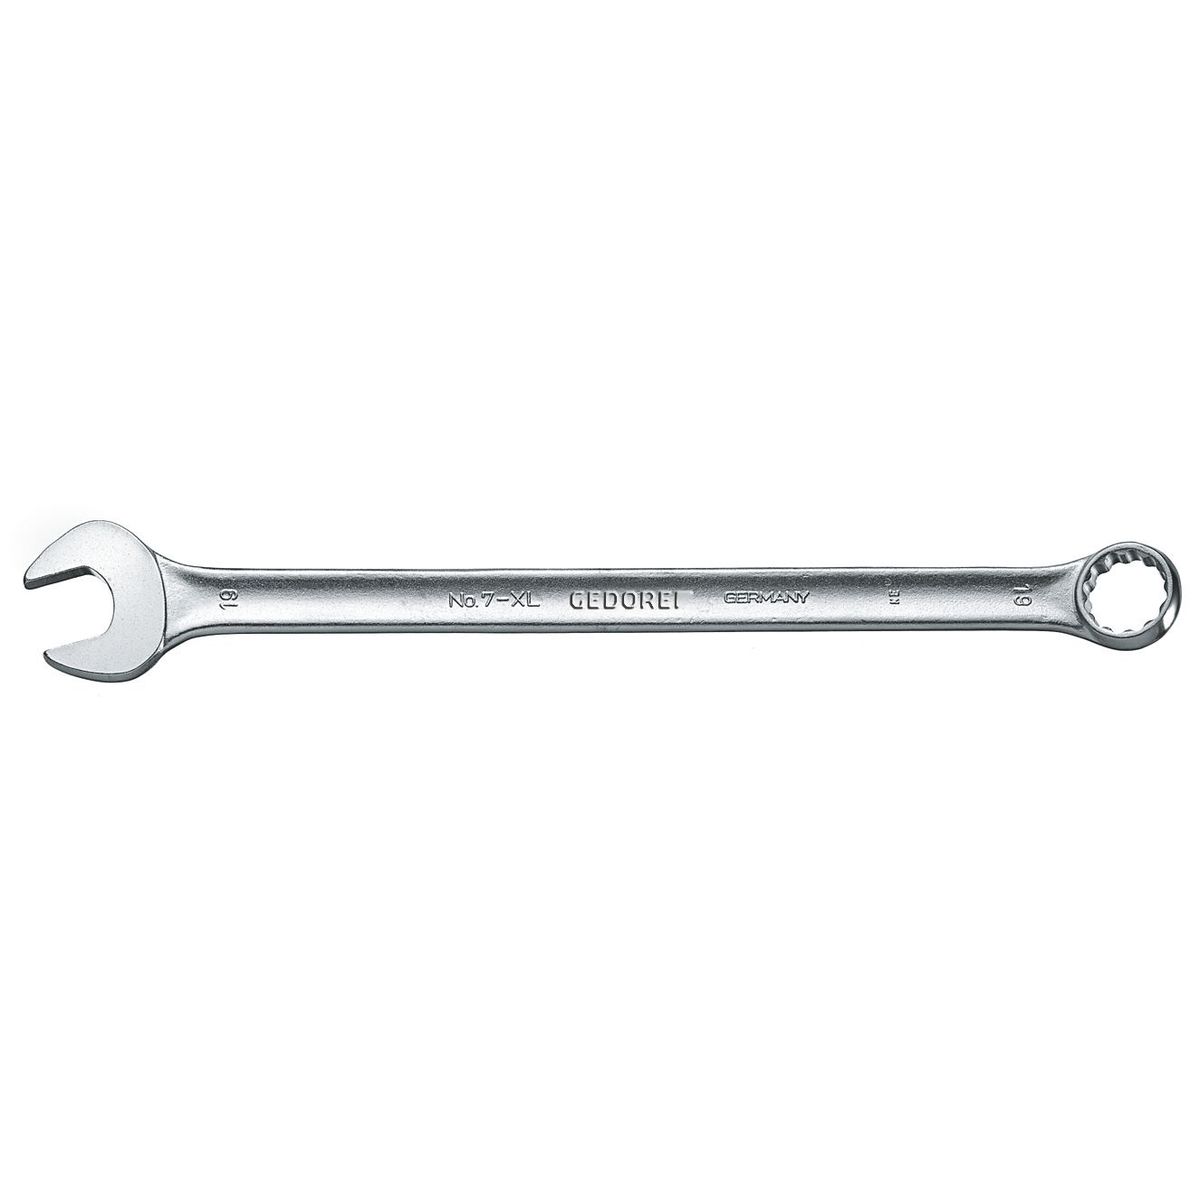 Combination spanner, extra long 22mm No.7 XL 22 Gedore